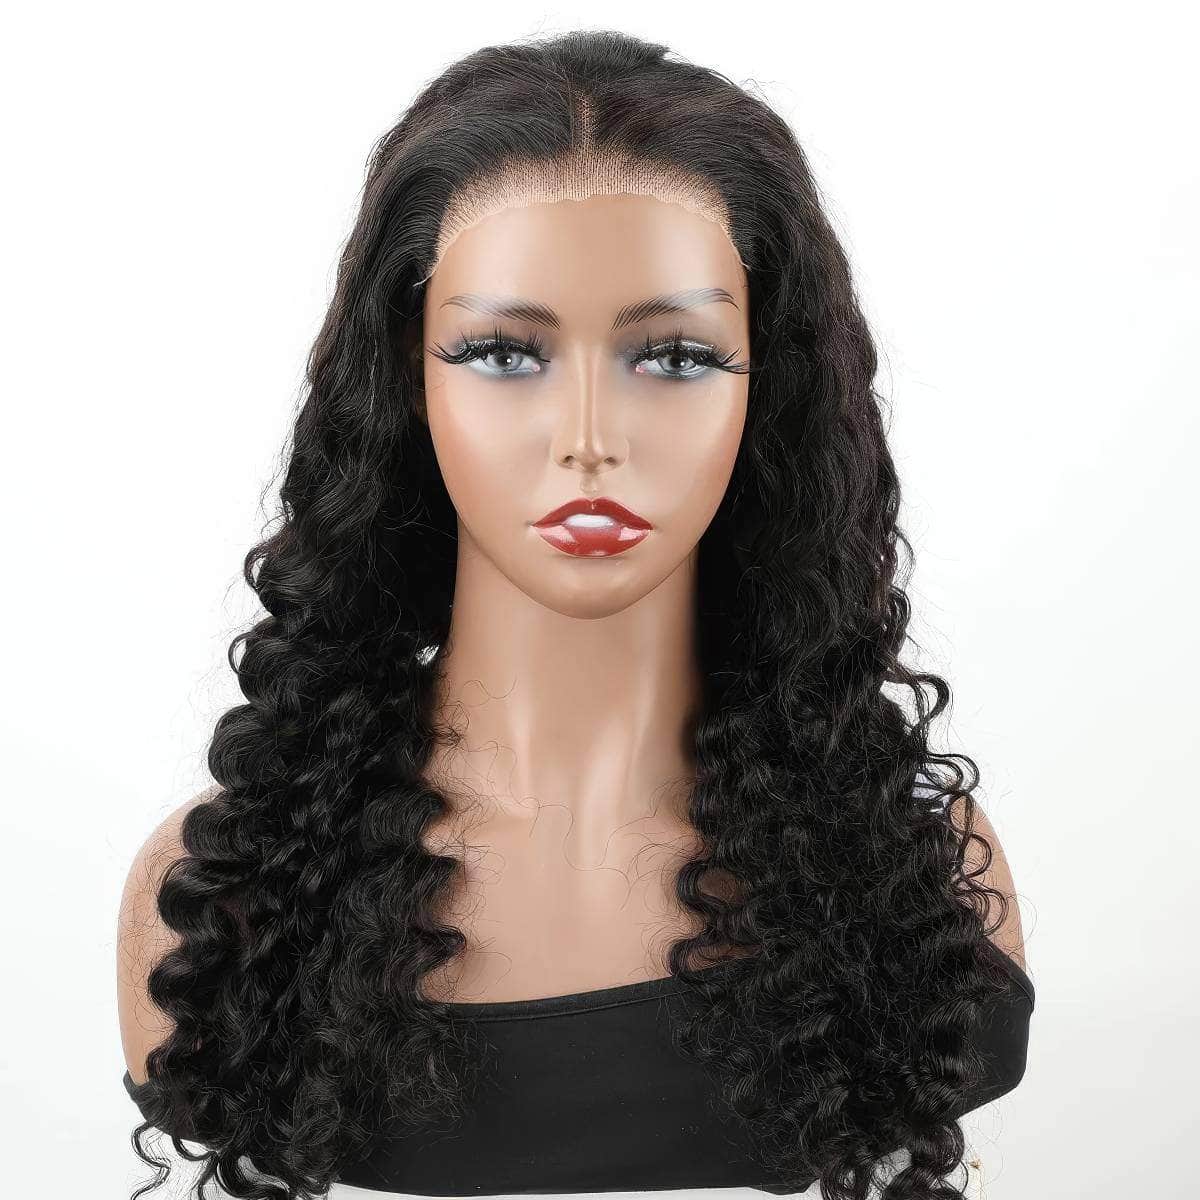 Wear And Go Loose Deep Wave Wig - 6x4 HD Transparent Curly Loose Wave Wig, Human Hair Wigs, Glueless Lace Front Wig